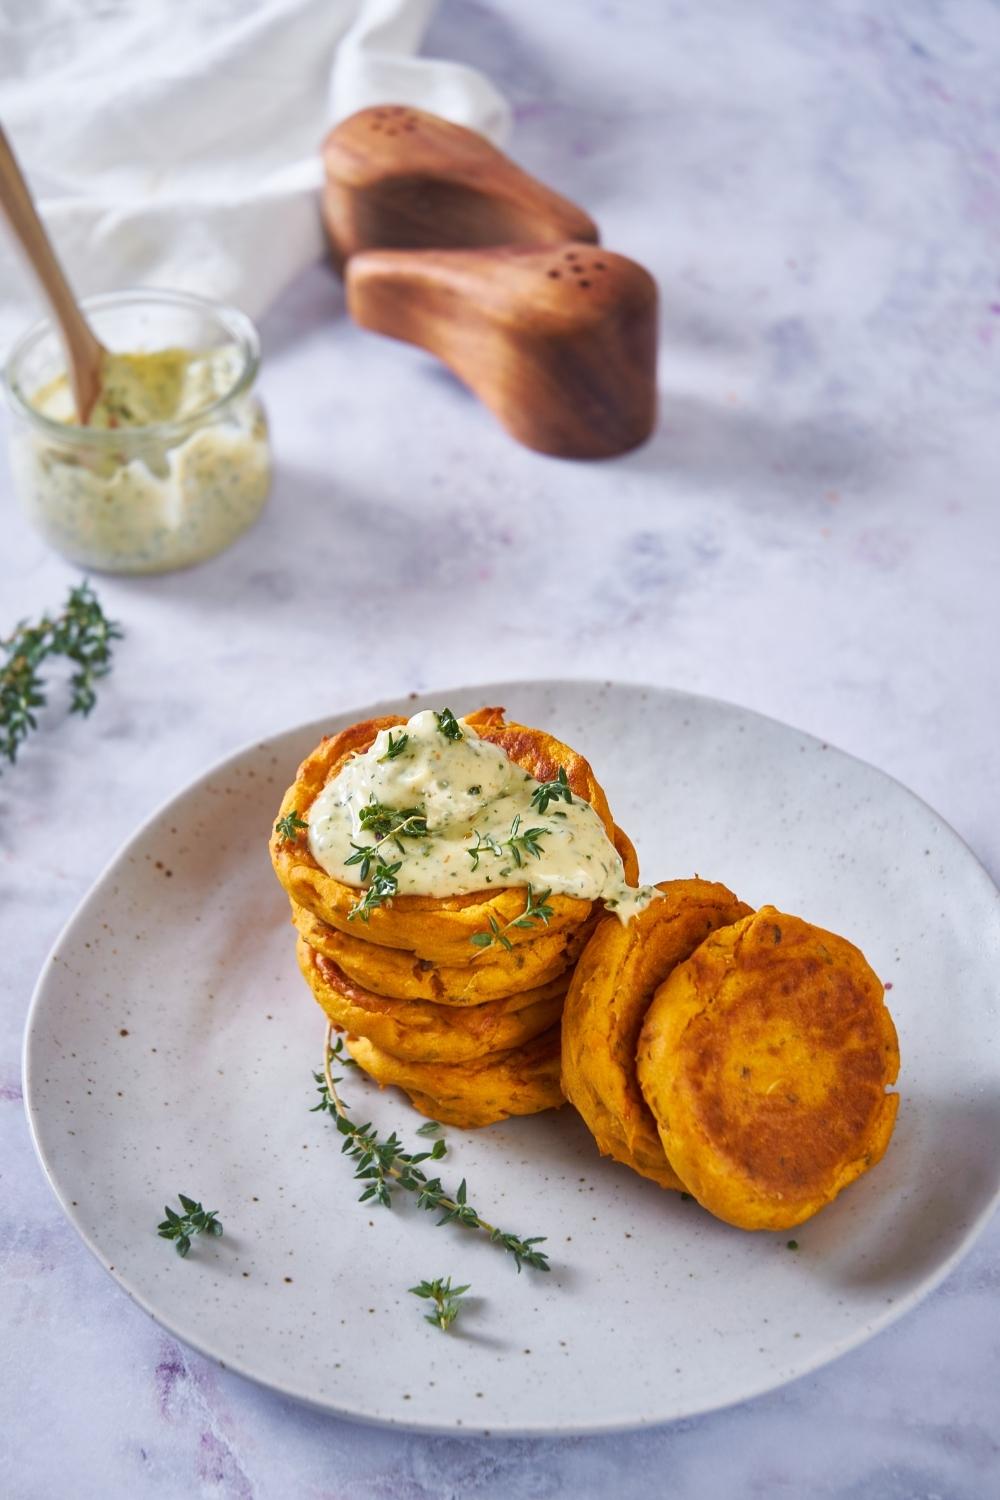 Sweet potato patties stacked on top of each other with some off to the side, topped with an herb mayo and additional fresh herbs. An empty jar of herb mayo is in the background next to a salt and pepper shaker.